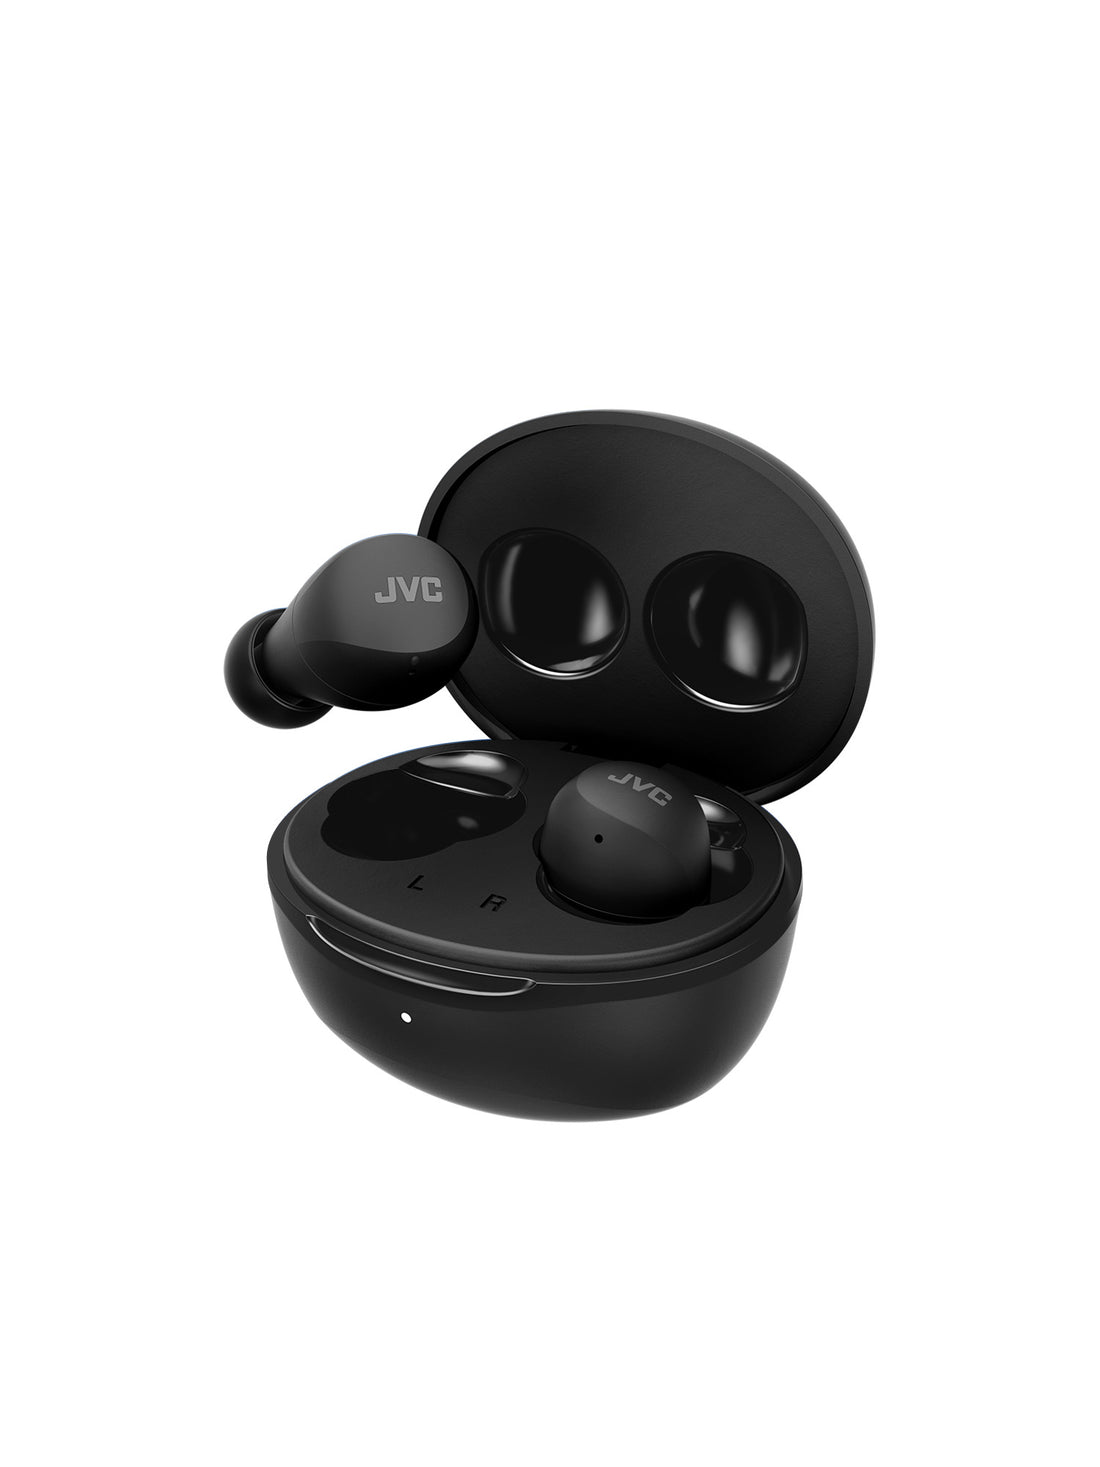 HA-A6T-B in Black Gumy mini wireless earbuds and charging case by JVC